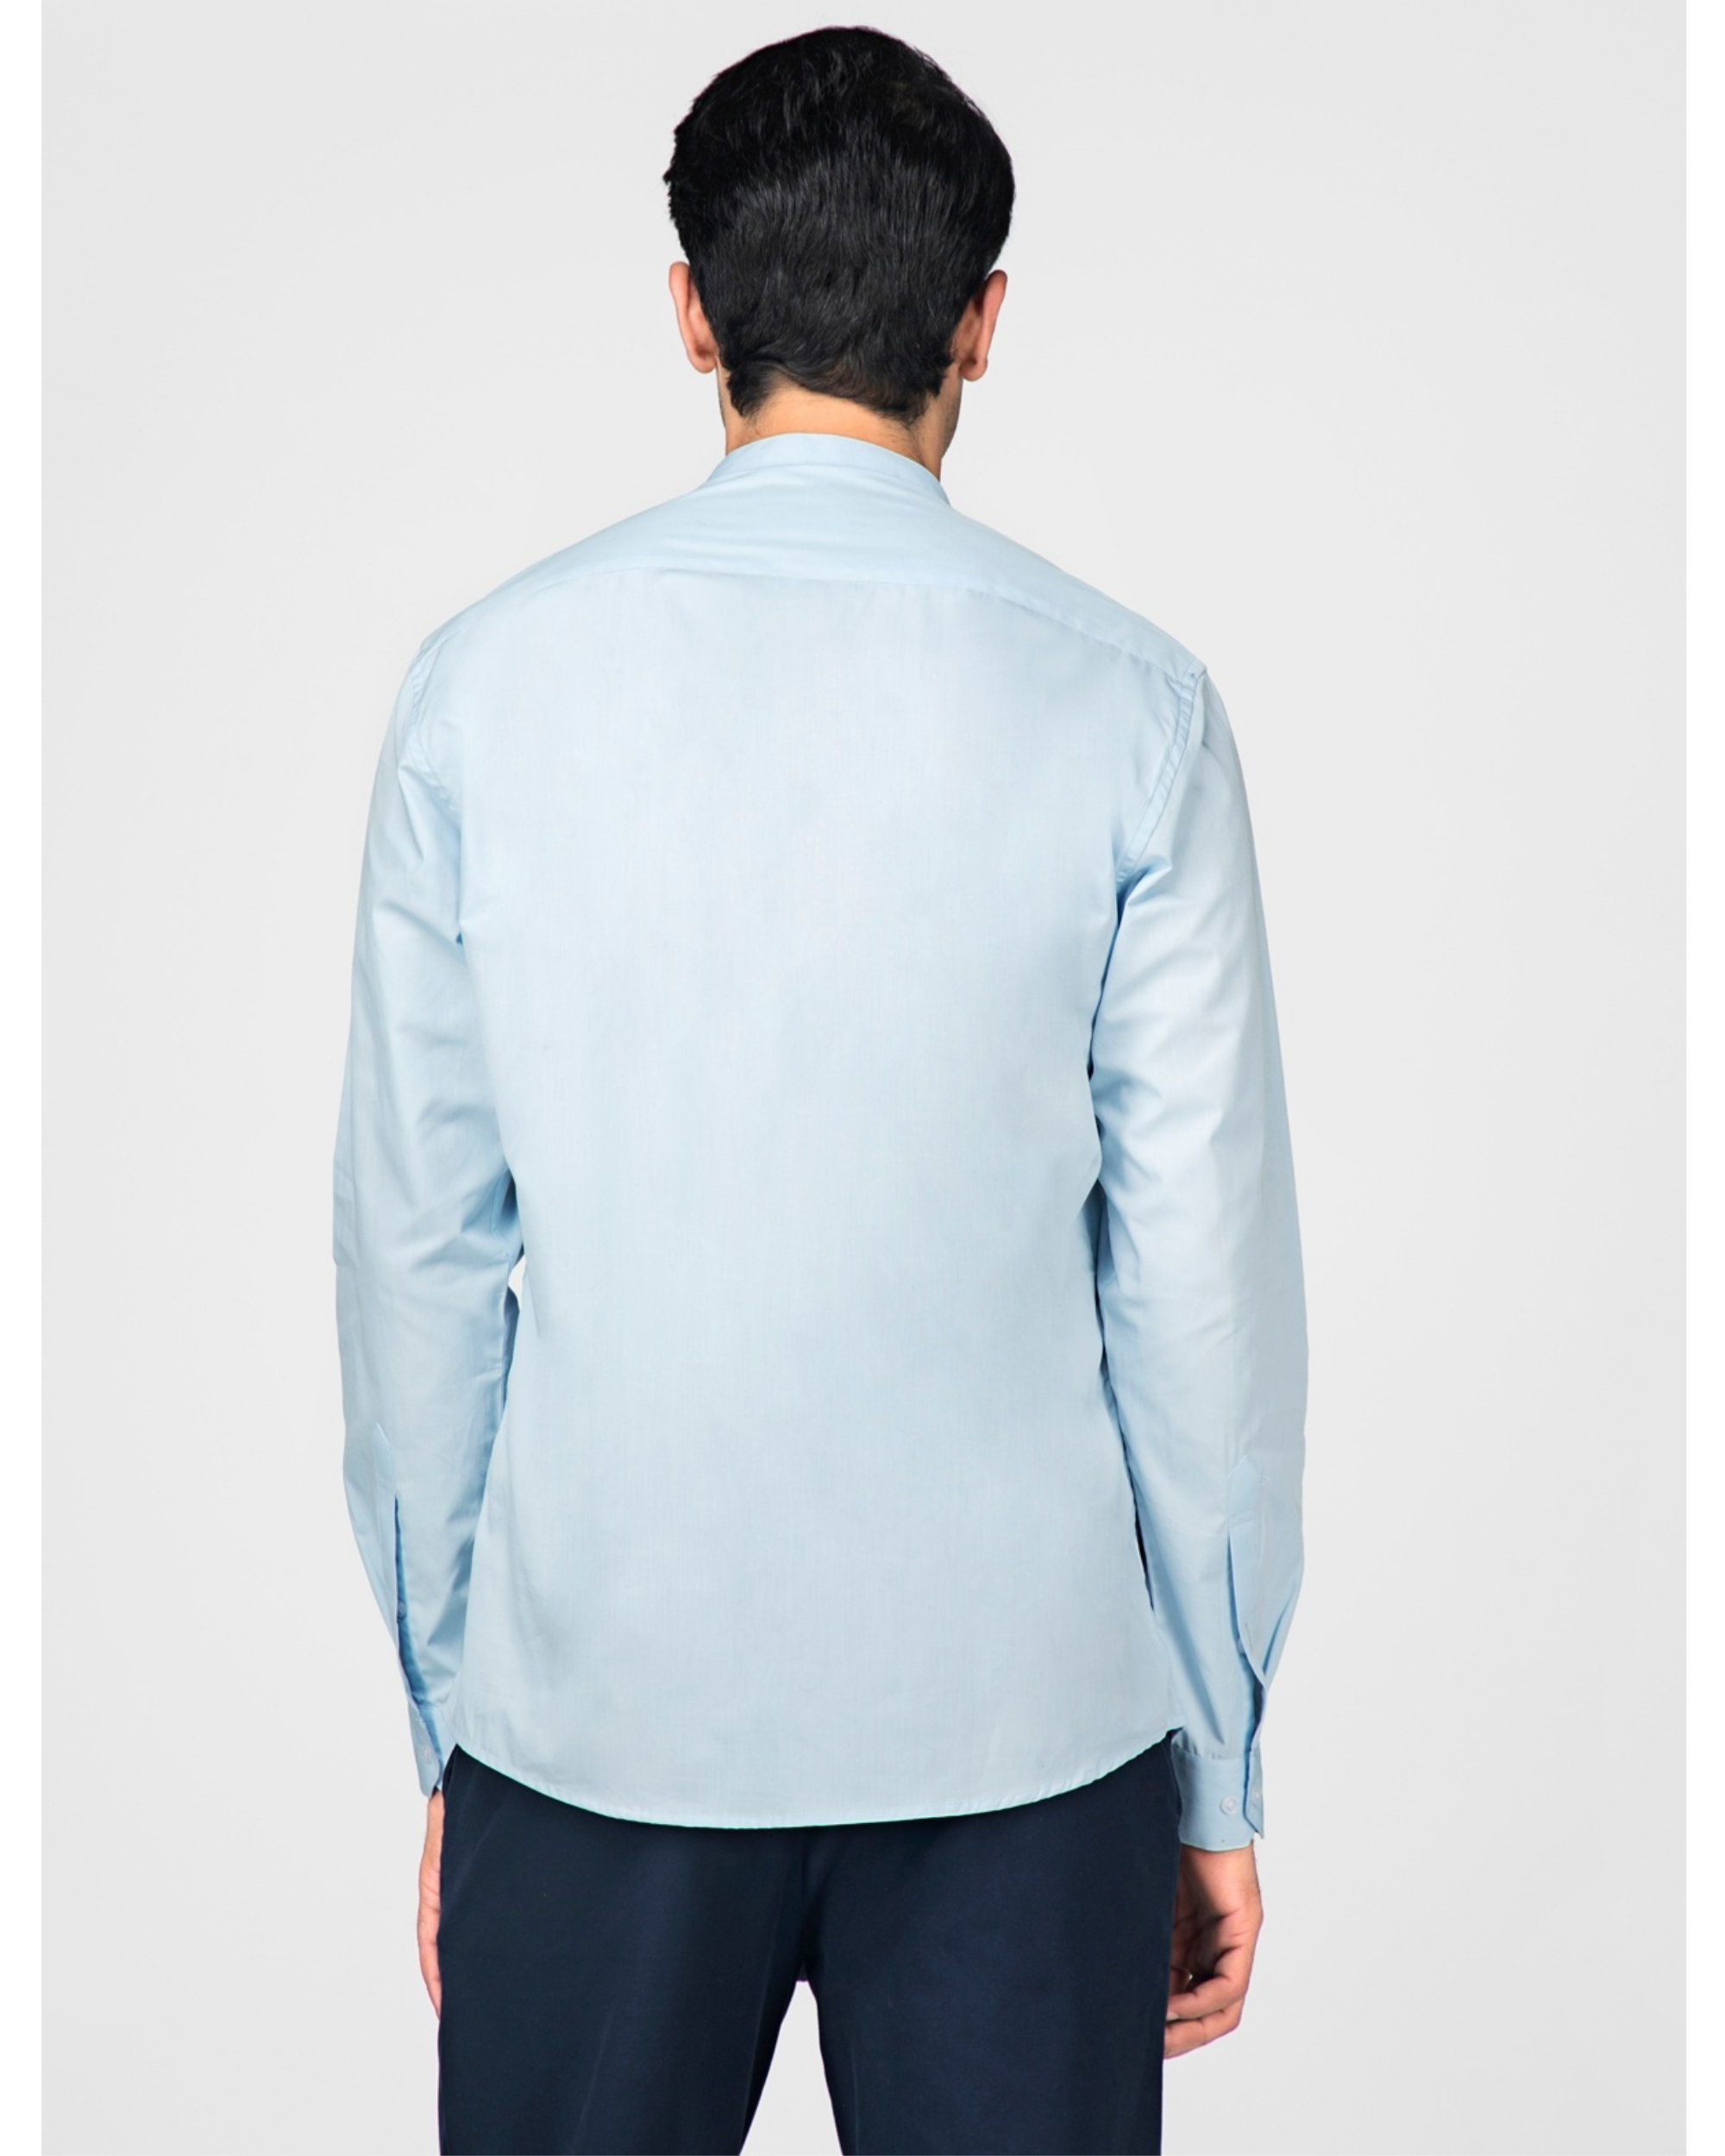 Sky blue and white panel striped shirt by Green Hill | The Secret Label